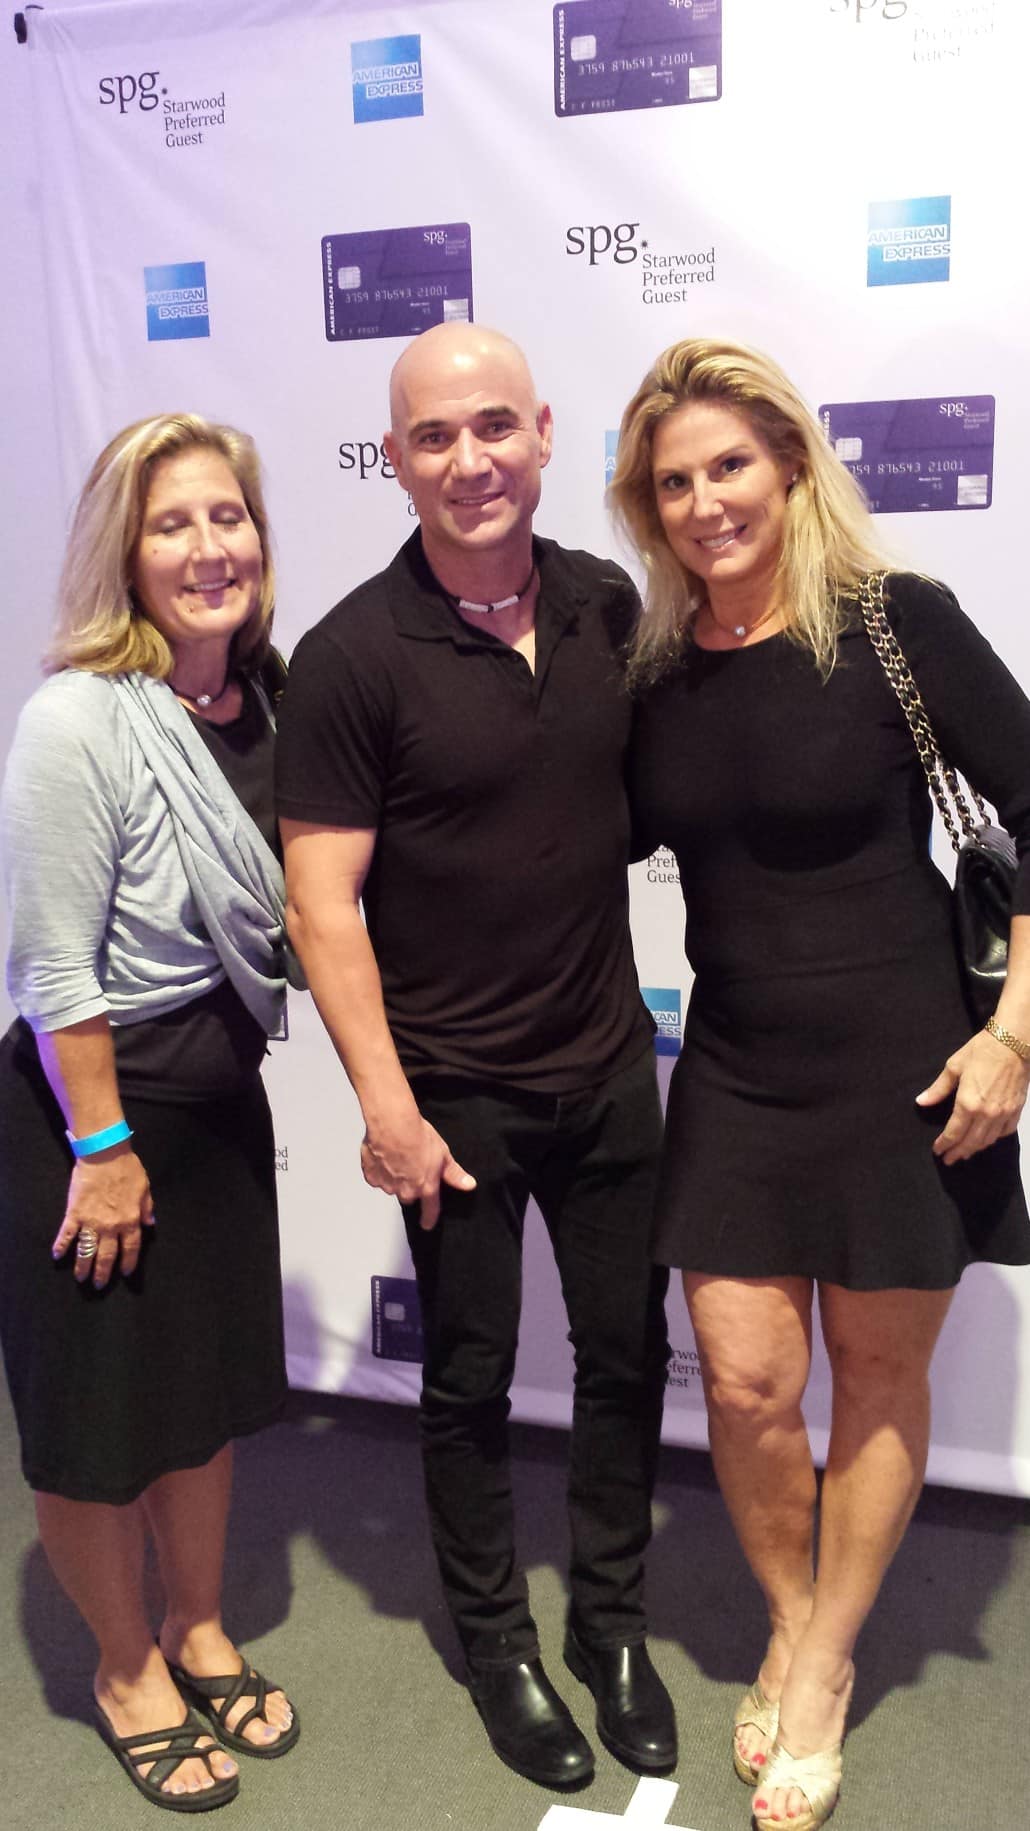 Carol and I getting our picture taken with the one-and-only Andre Agassi